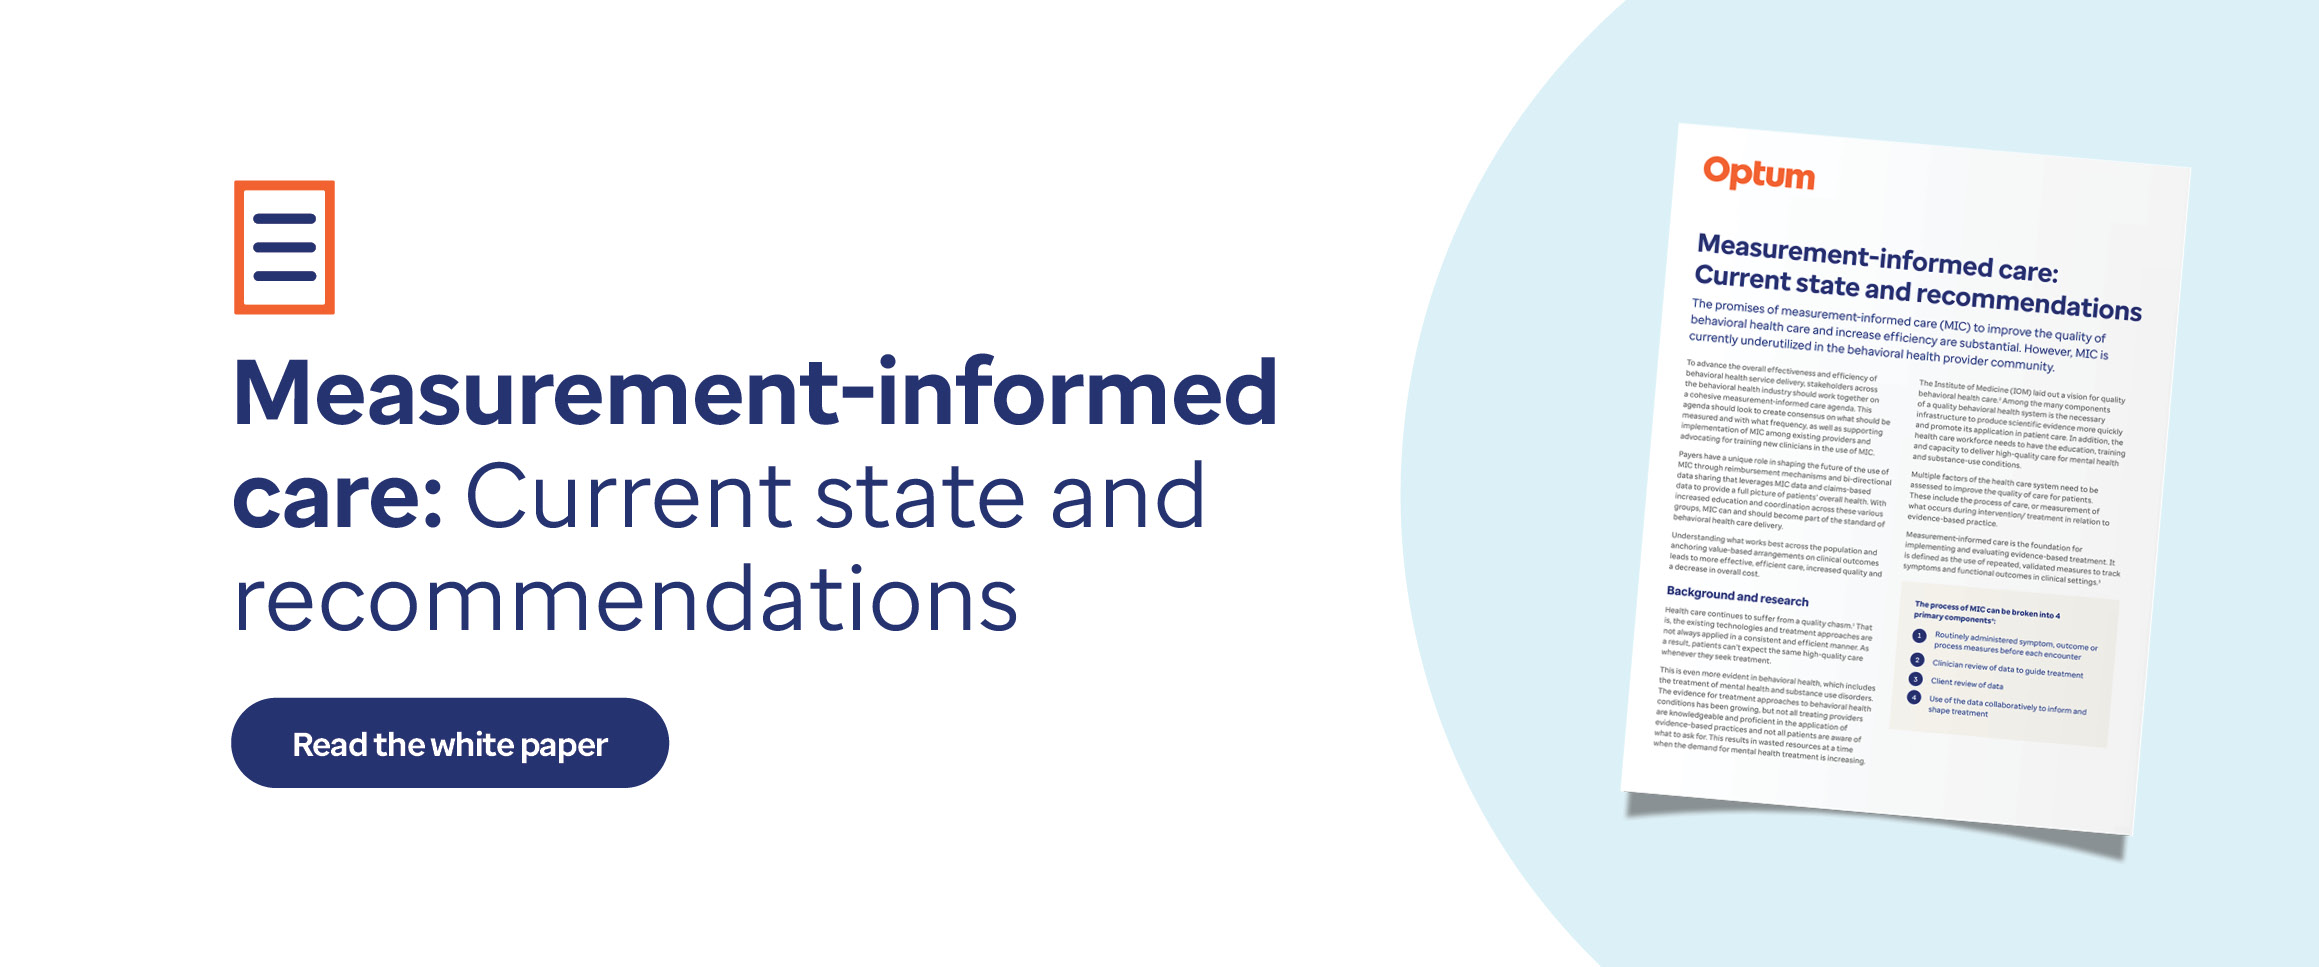 Measurement-informed care: Current state and recommendations 